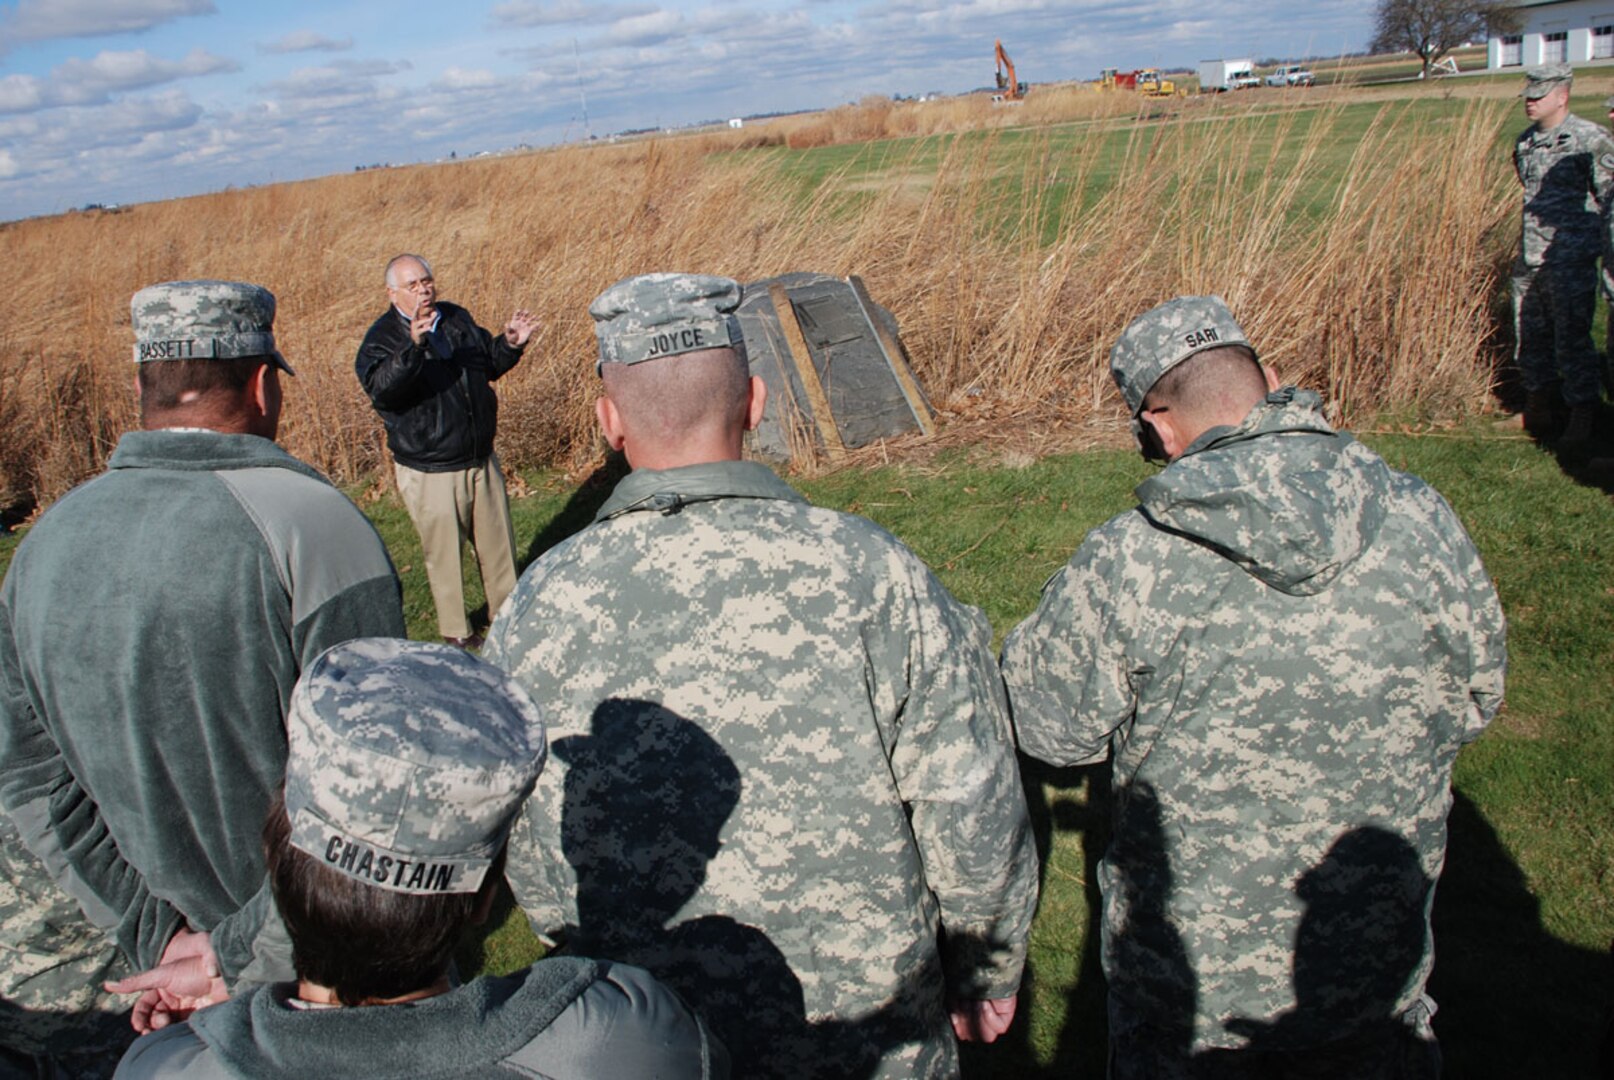 Purdue University agronomy professor George Van Scoyoc explains the difference between forest and prairie soils to Soldiers of the Indiana National Guard's 1-19th Agribusiness Development Team at the Beck Agricultural Center in West Lafayette, Ind., on Tuesday, Nov. 18, 2008. The Citizen-Soldiers will use this training and their civilian acquired skills to help Afghanistan farmers when the team deploys in 2009.